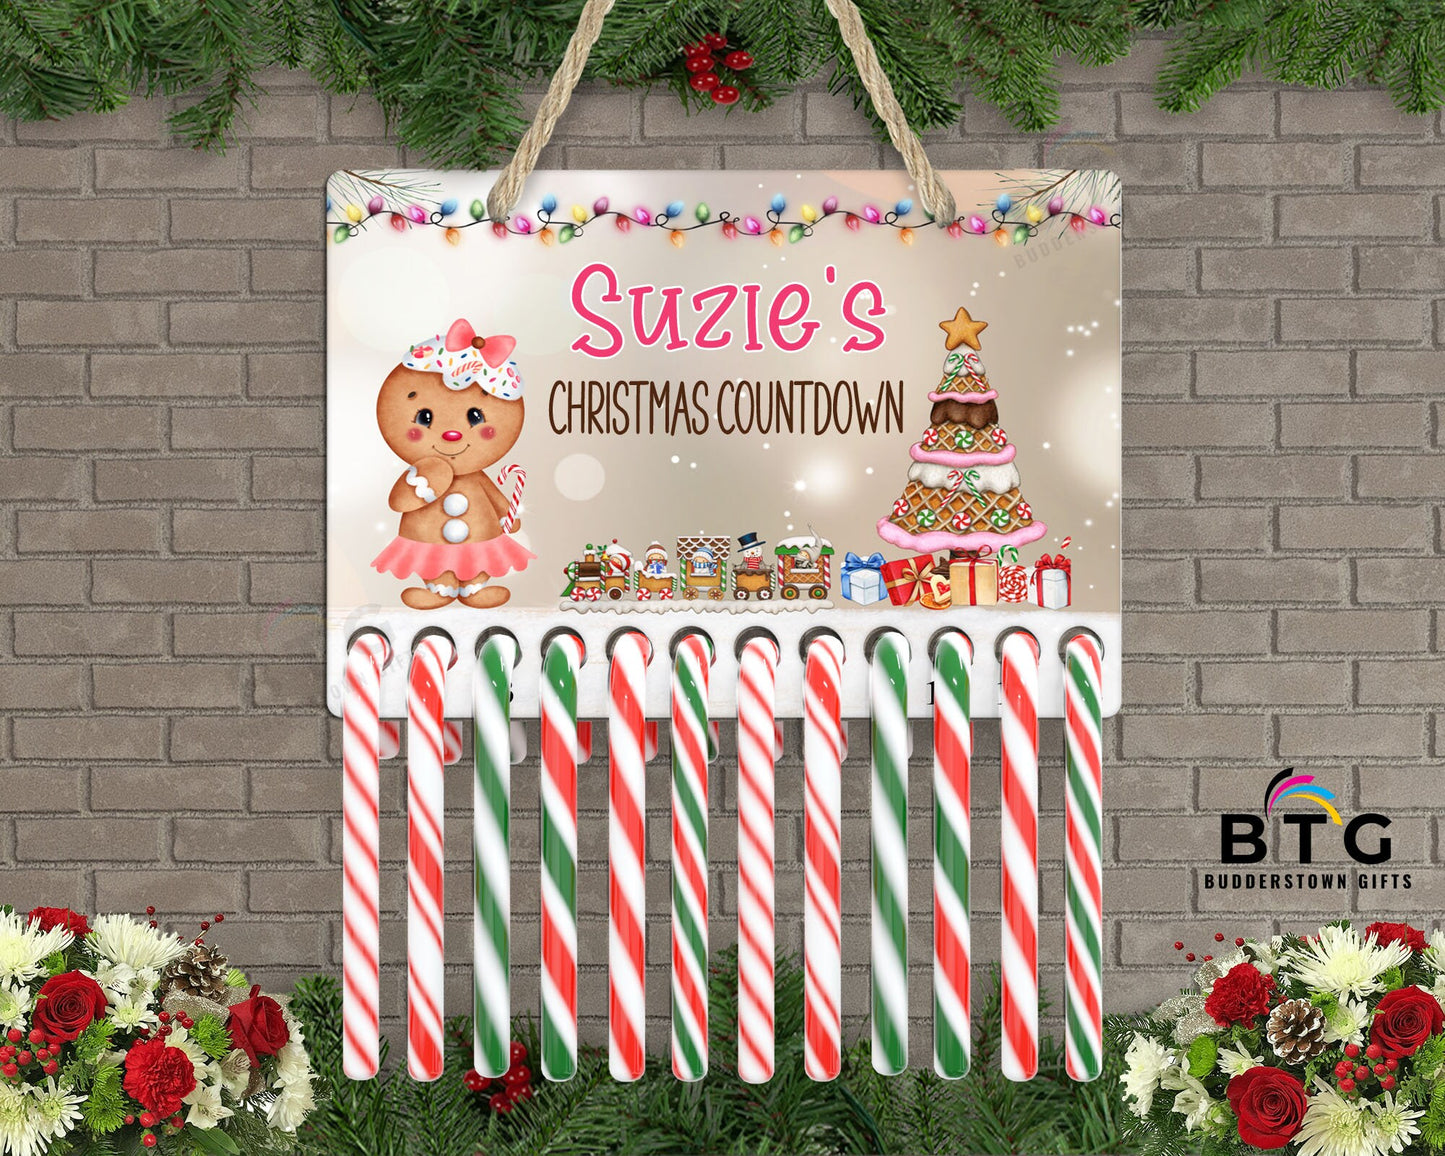 Candy Cane Christmas Countdown - 12 Days to Christmas - Gingerbread Girl - Kids Interactive